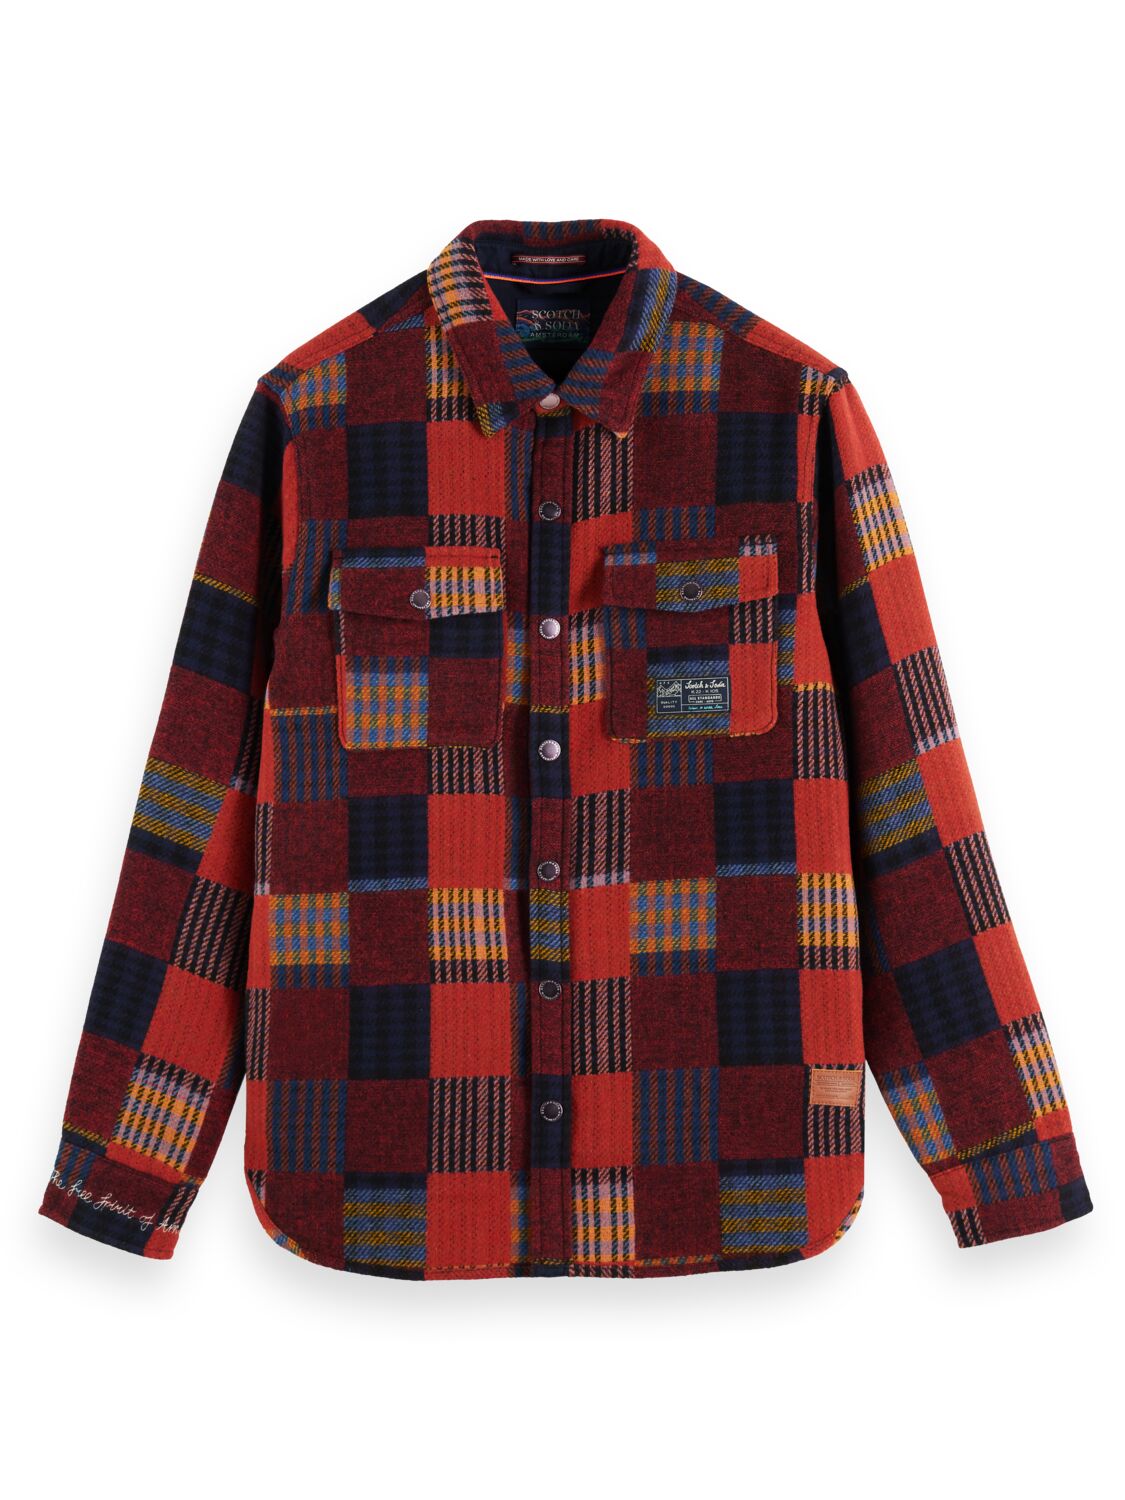 Scotch and Soda Jacquard Patchwork Checked Overshirt - Multi